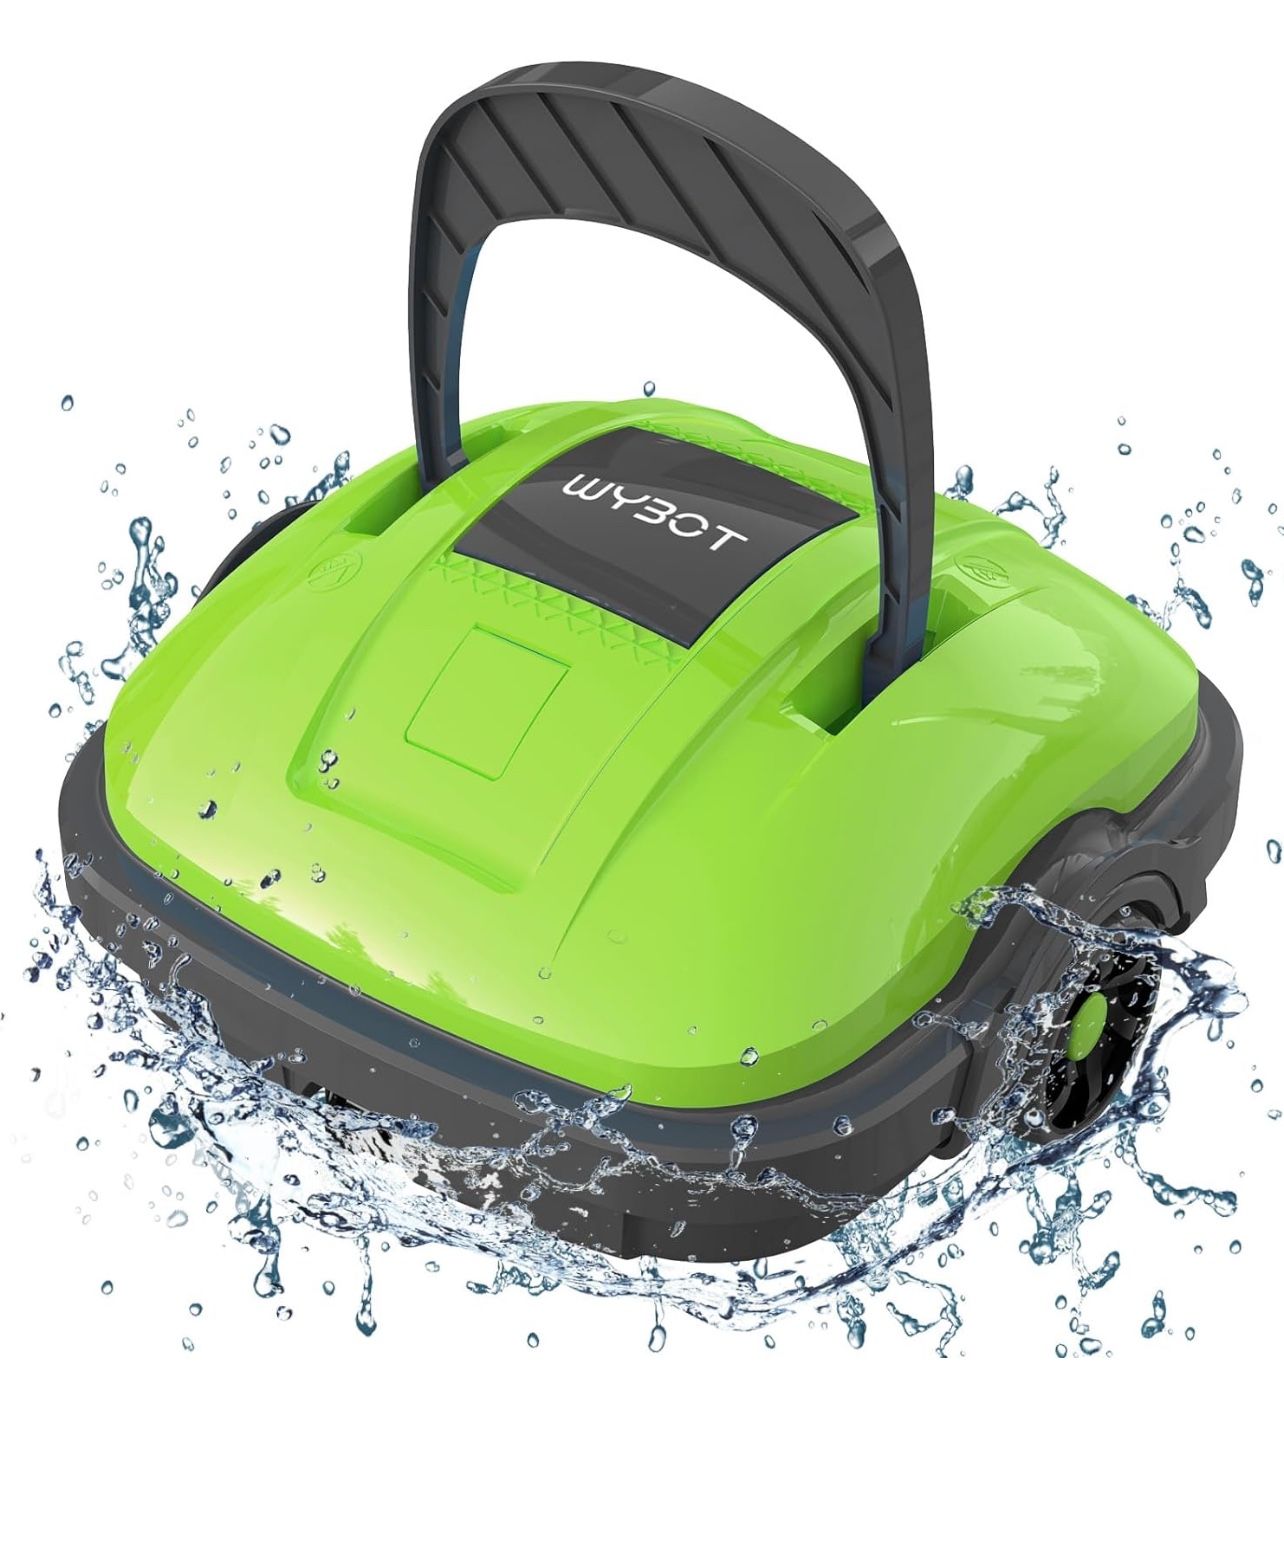 Cordless Robotic Pool Vacuum, Powerful Suction,180μm Fine Filter,Automatic Pool Cleaner, Self-Parking, for Above Ground Flat Pool Green